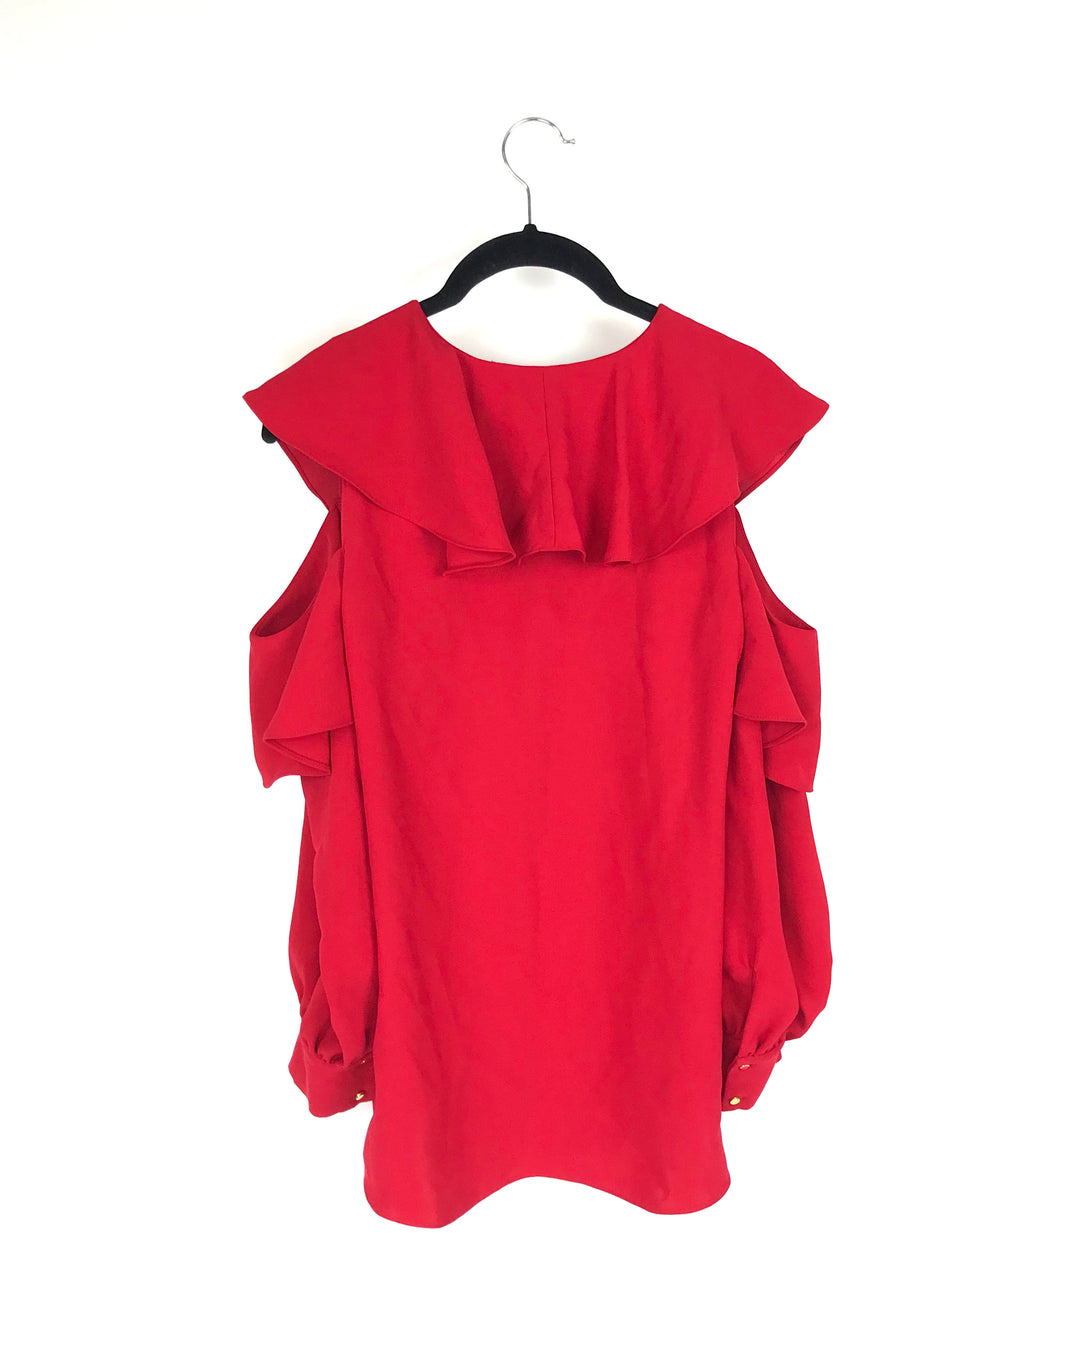 Red Ruffled Top - Small